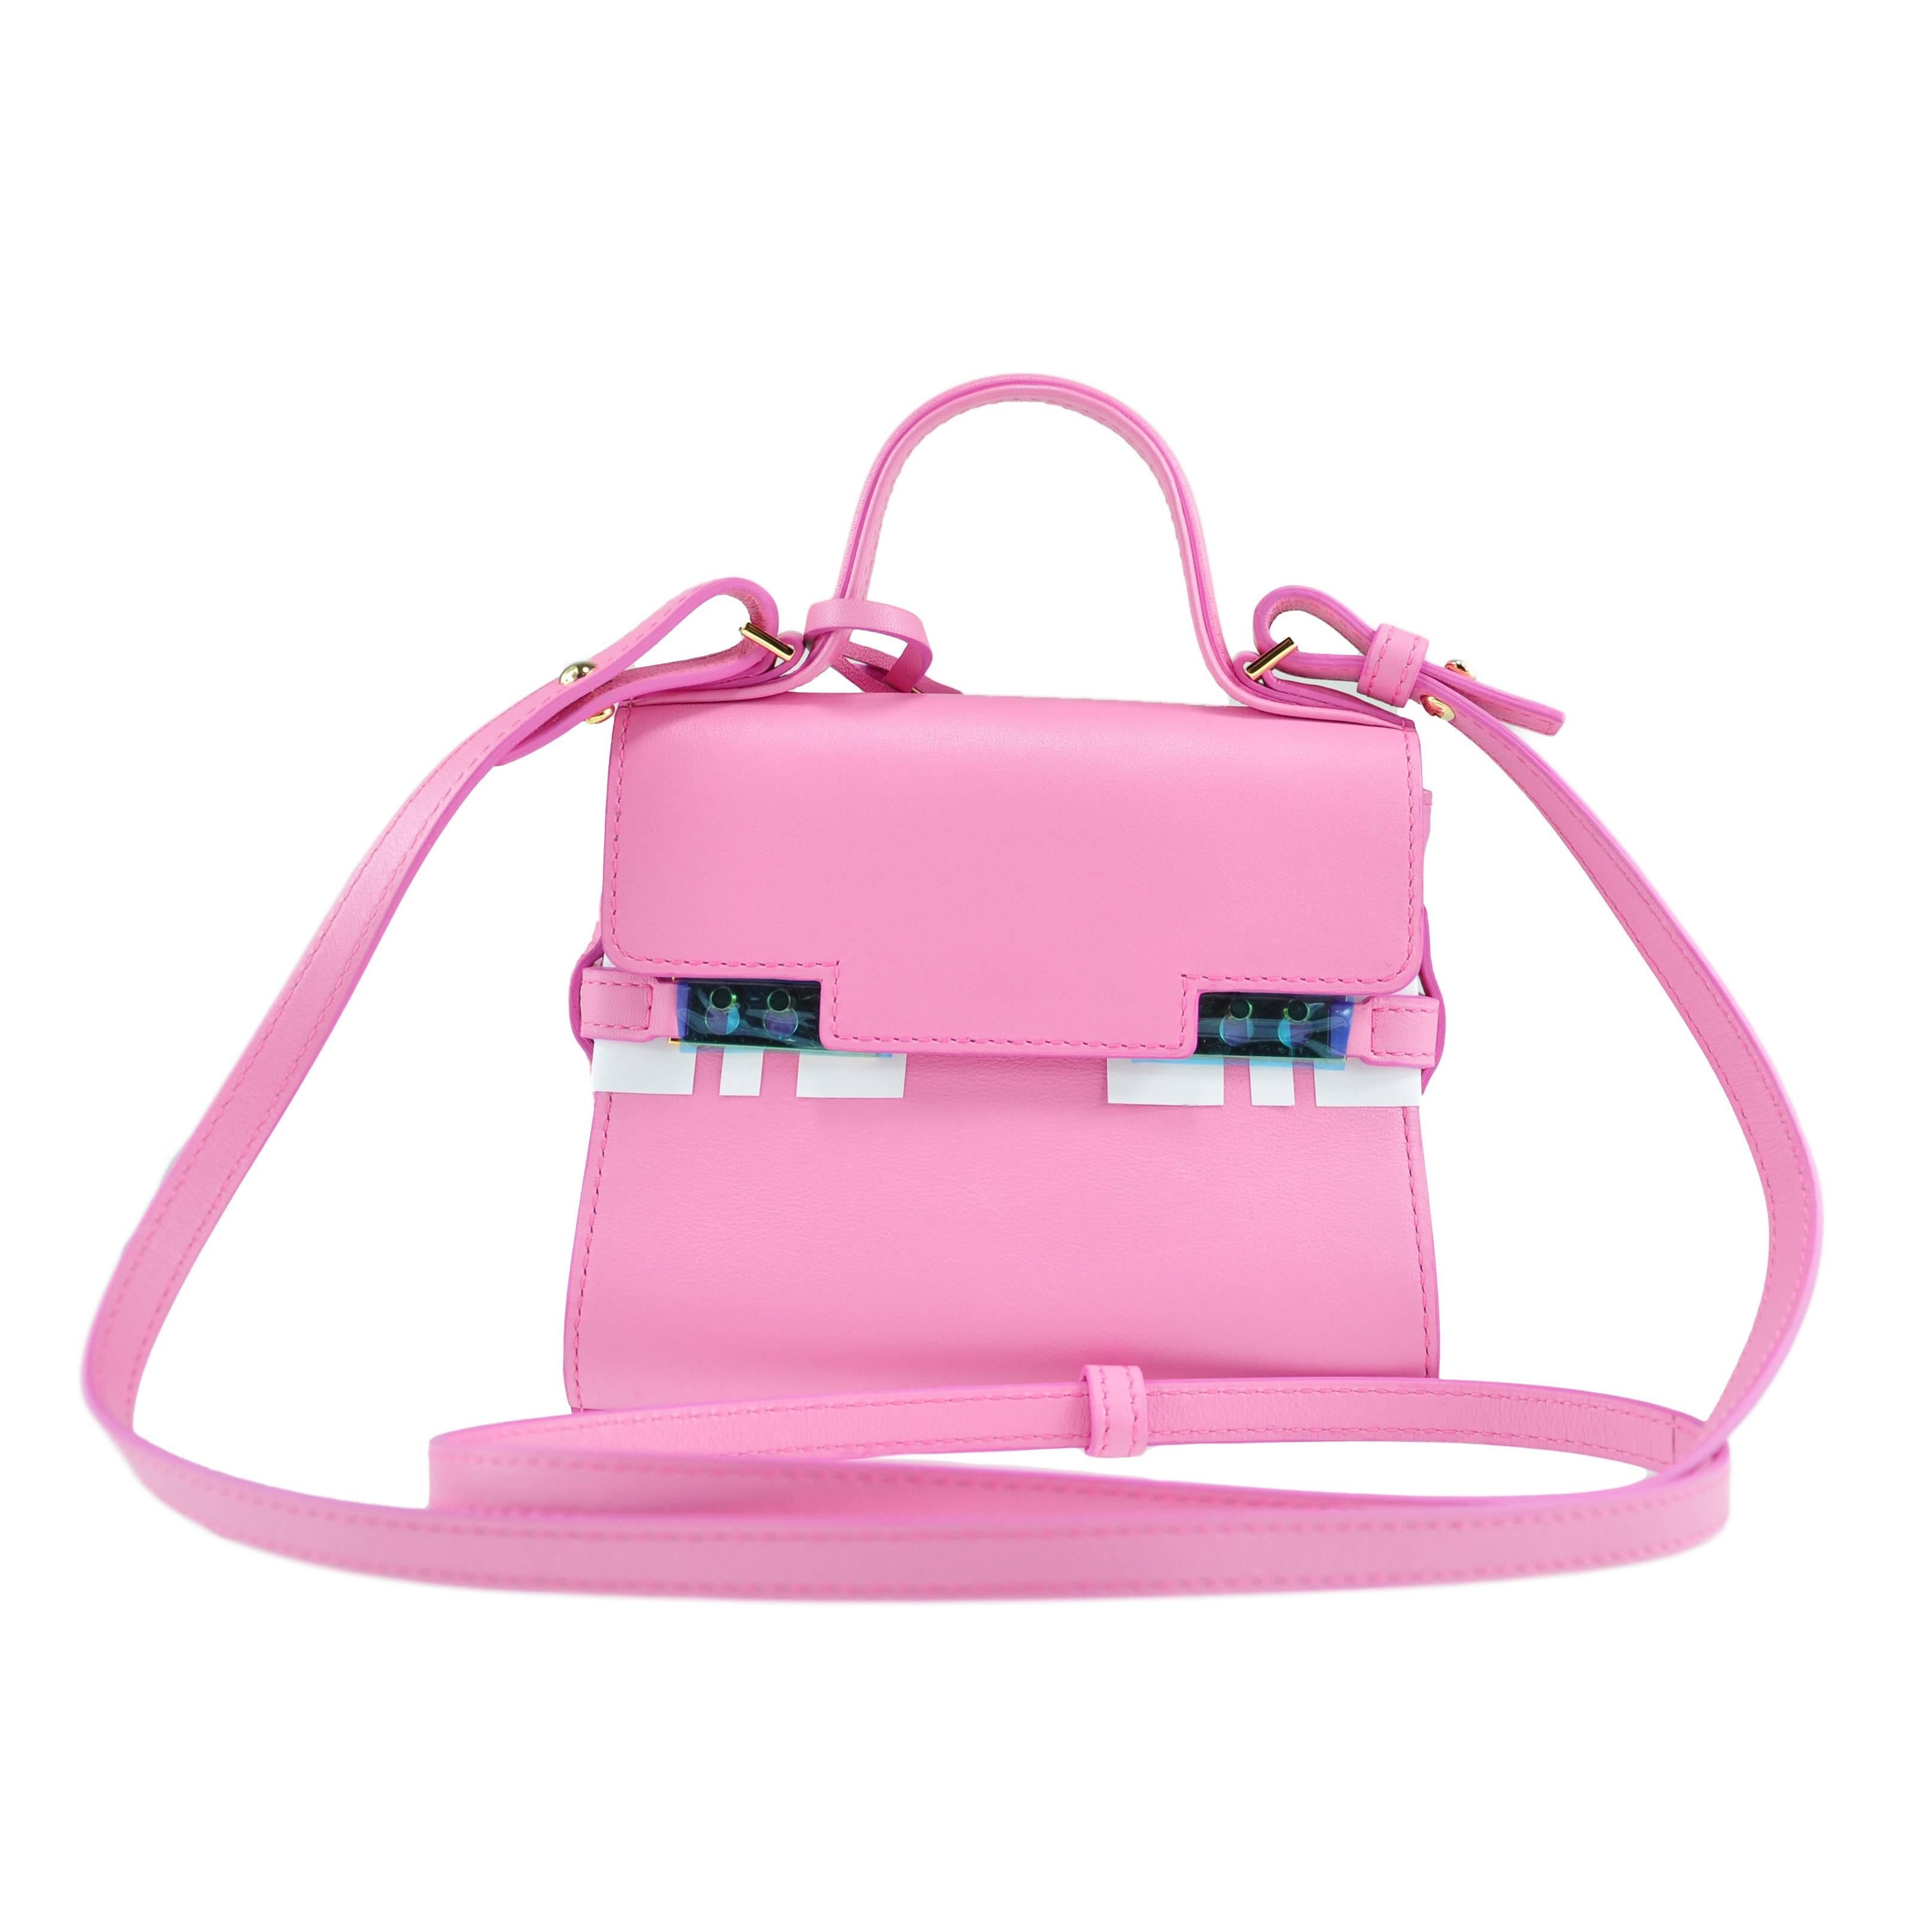 Delvaux Tempete Micro Flamingo Pink Calf Leather Bag New